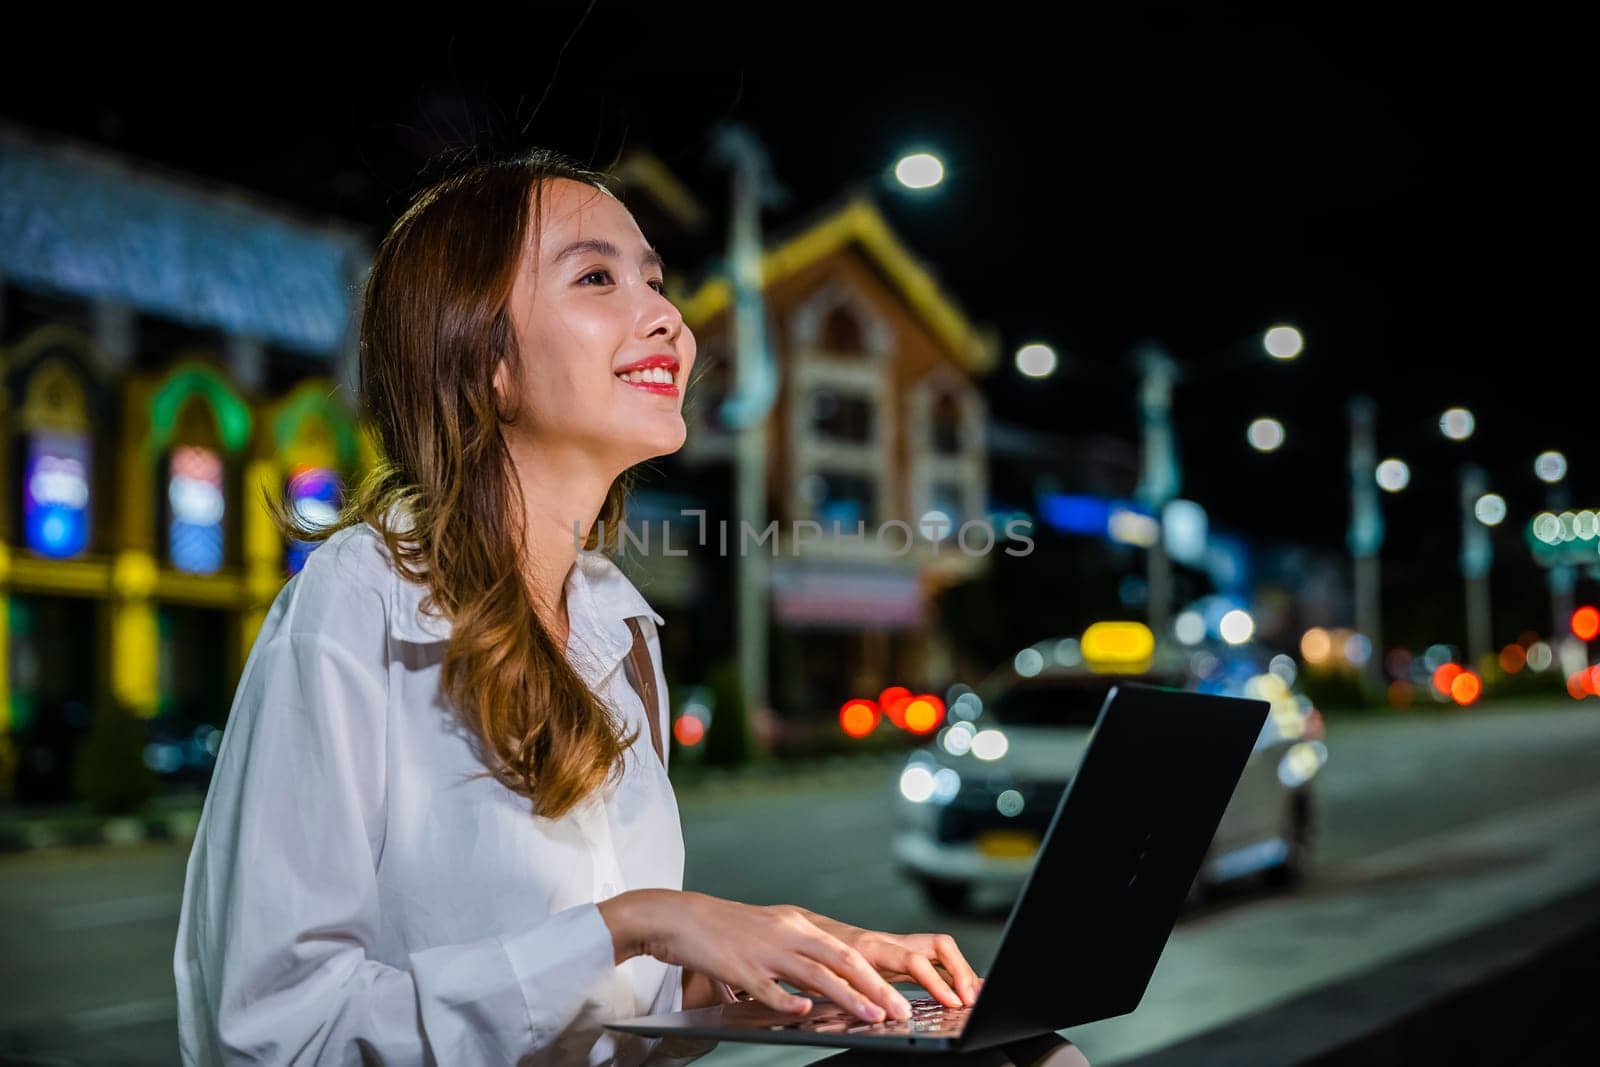 On a bustling city street at night, a woman is hard at work on her laptop computer, utilizing the convenience and mobility of her device to stay connected in the digital age.